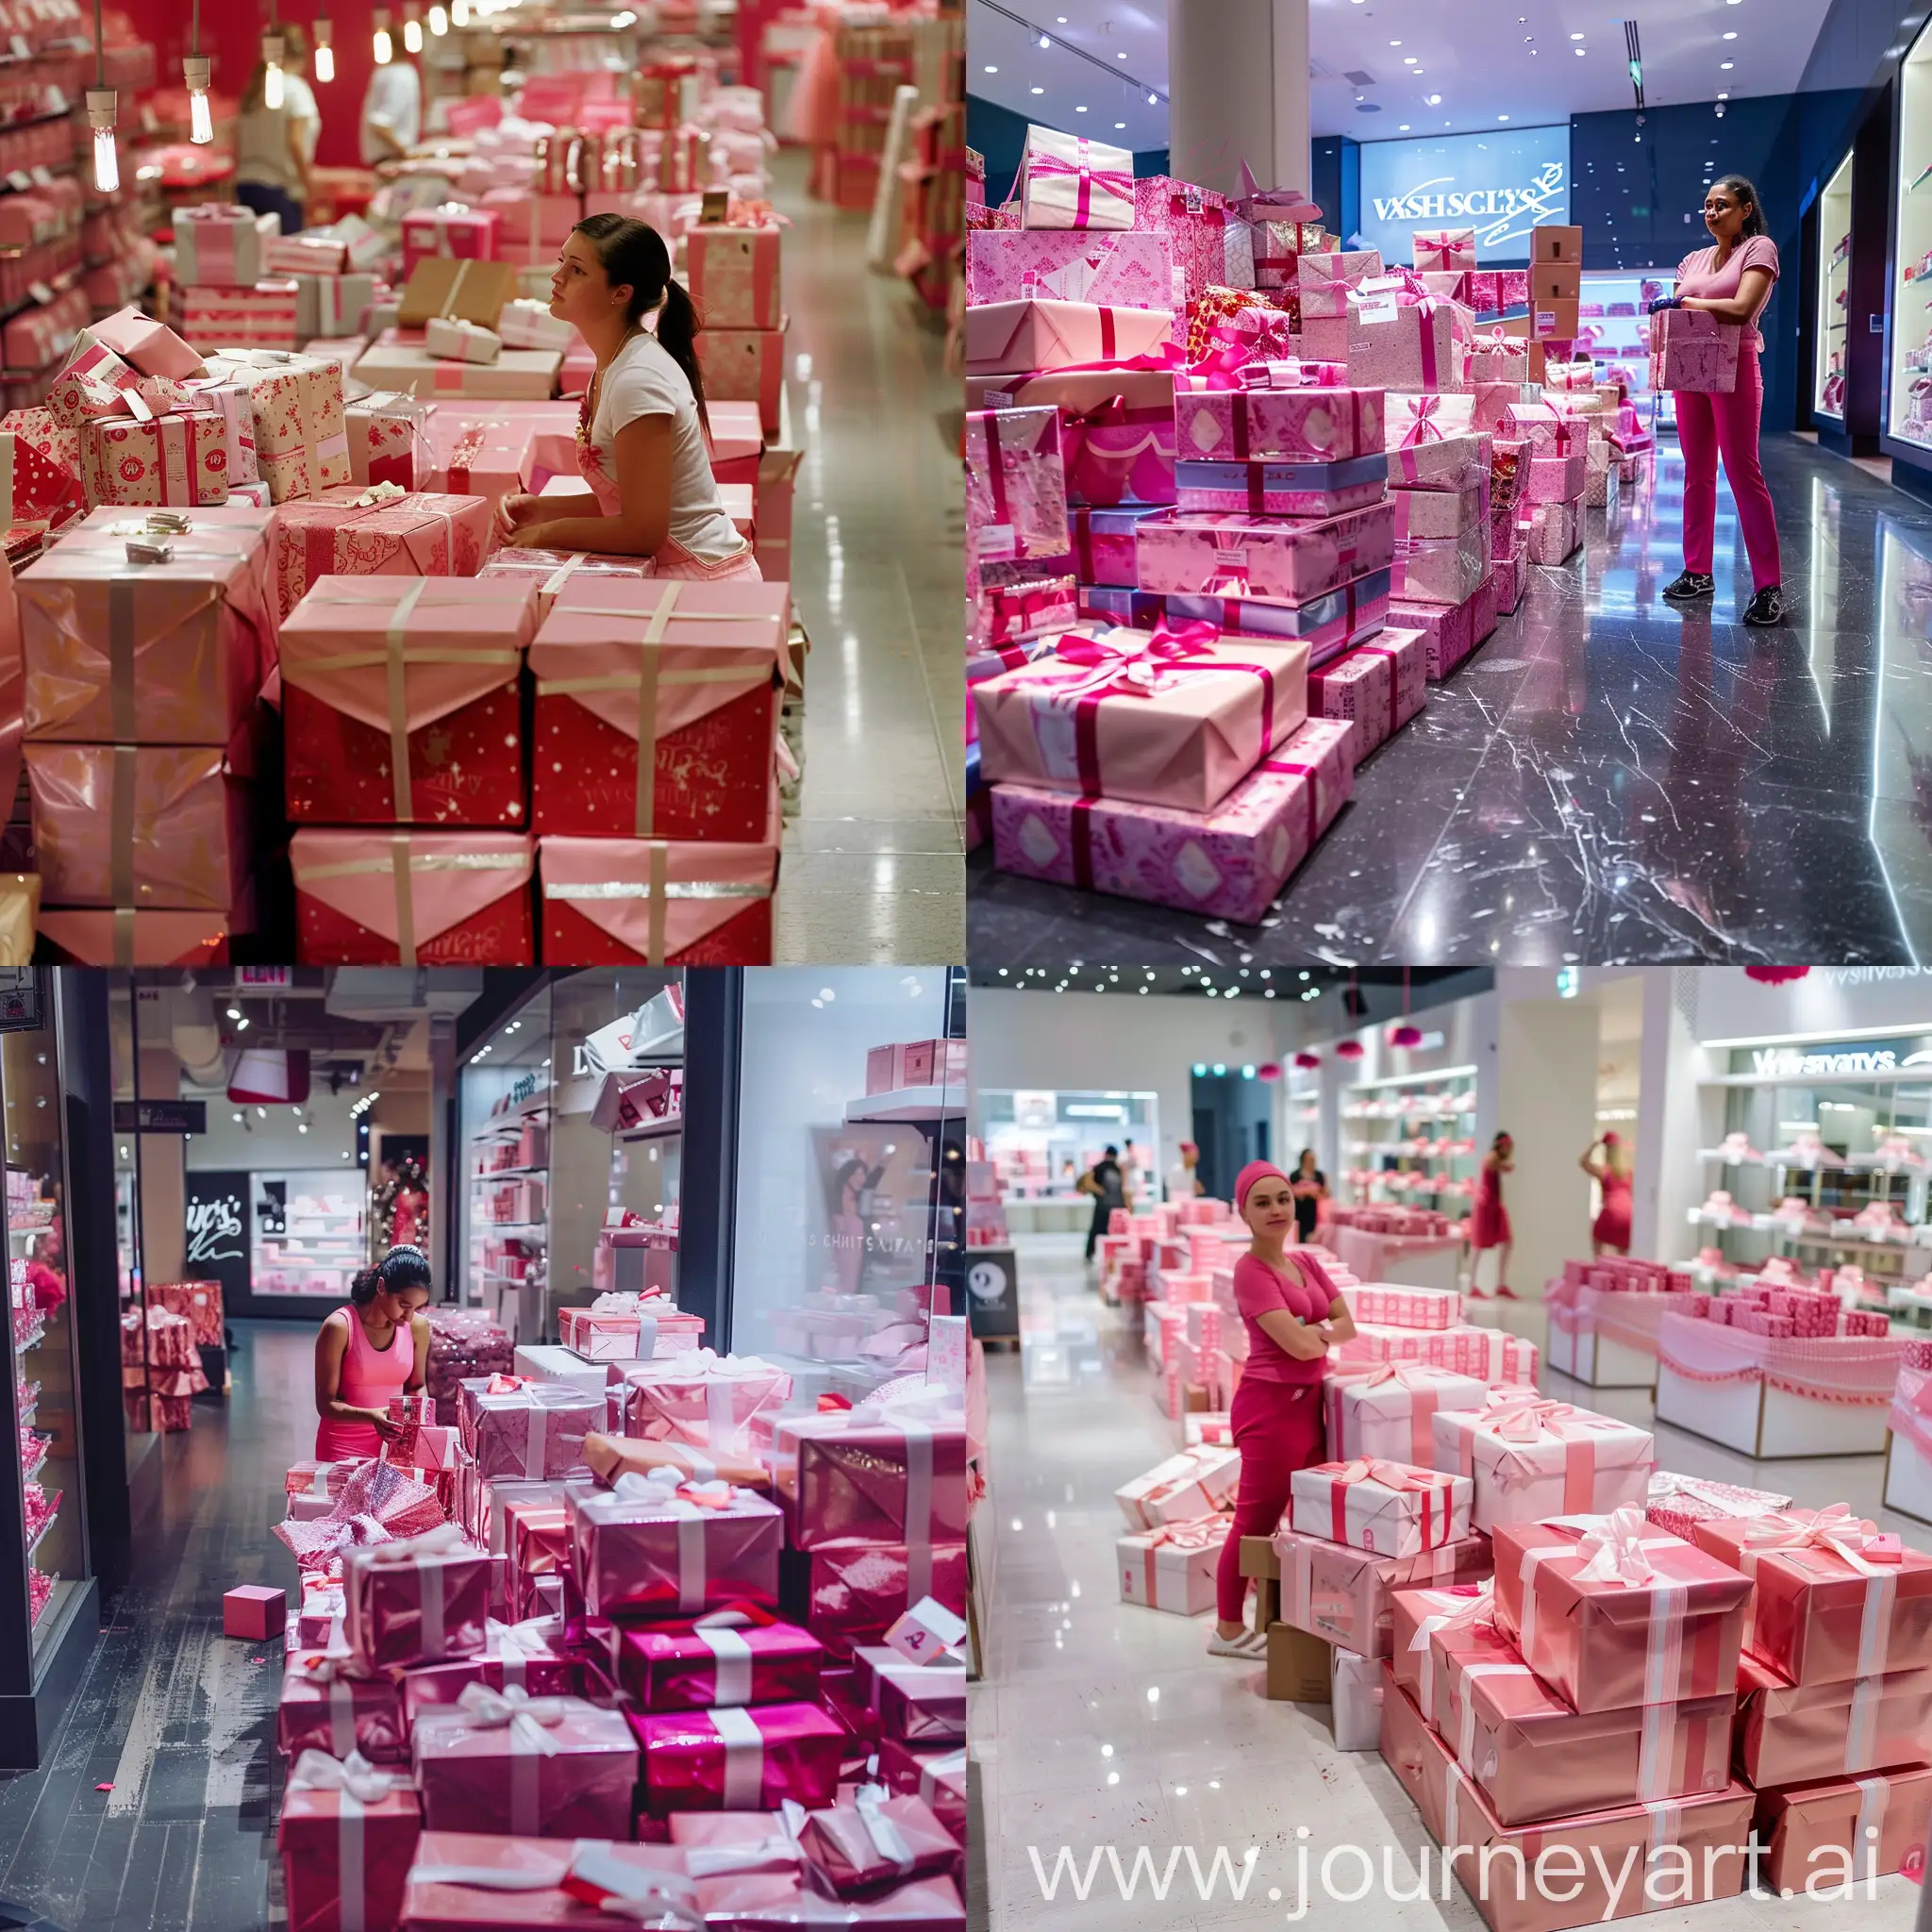 Real photo of a woman worker in the victoria's secret shop, standing near gift boxes stacked on the floor